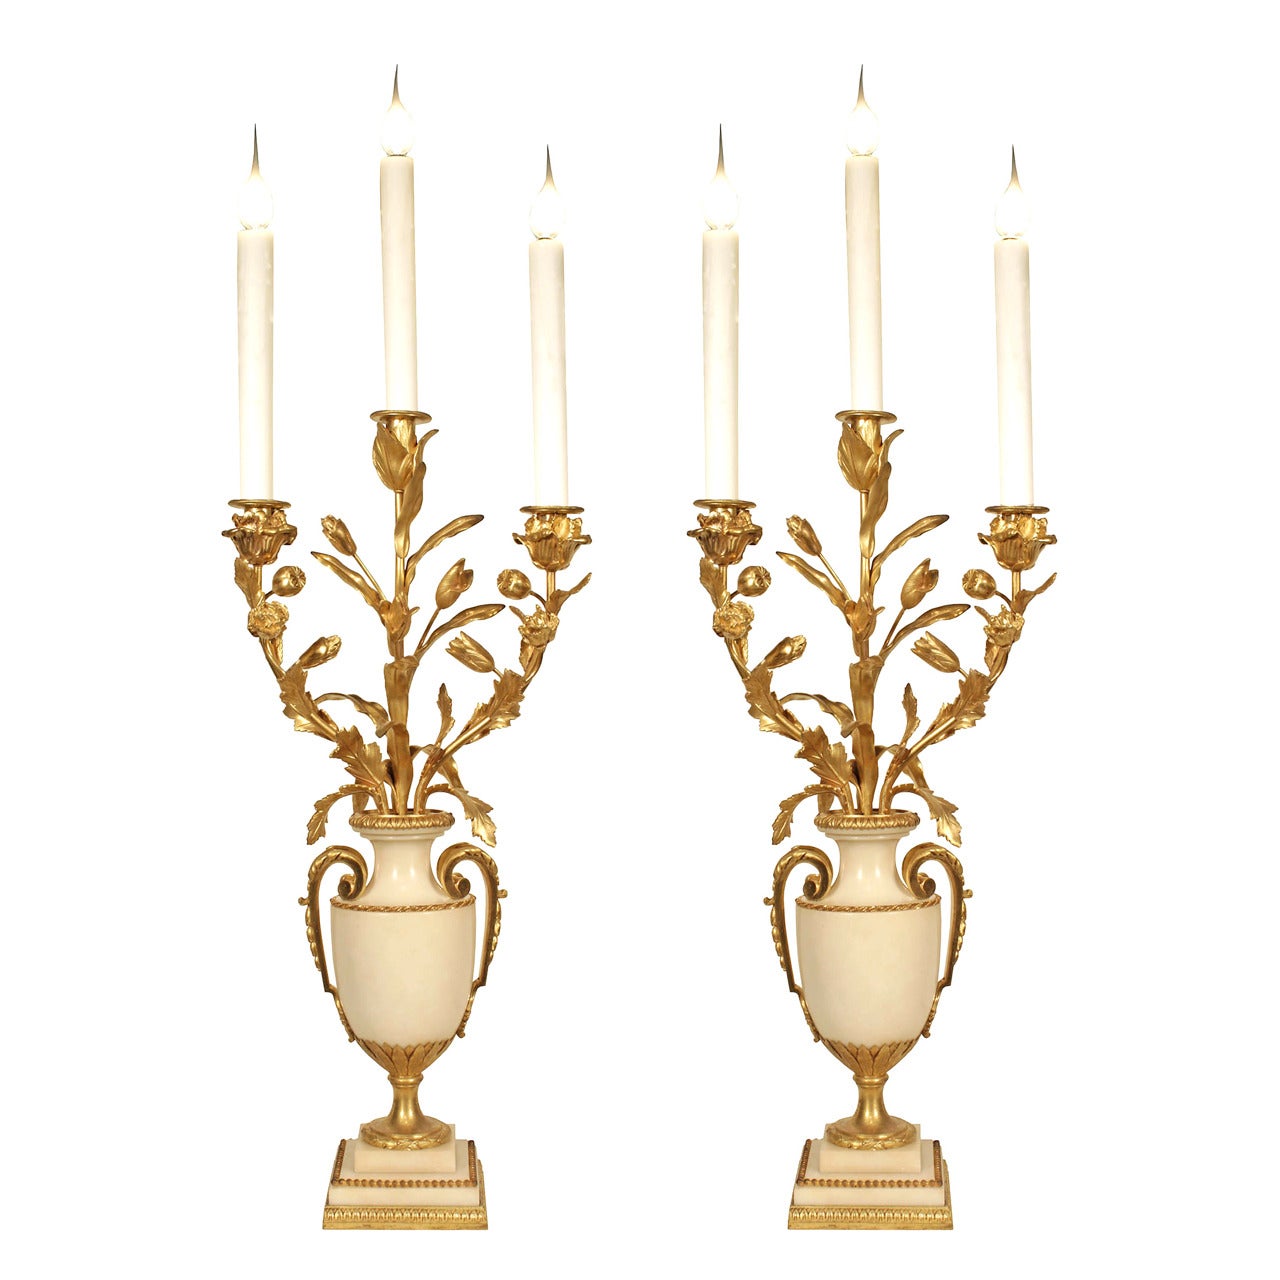 French Mid-19th Century Louis XVI Style White Carrara Marble and Ormolu Lamps